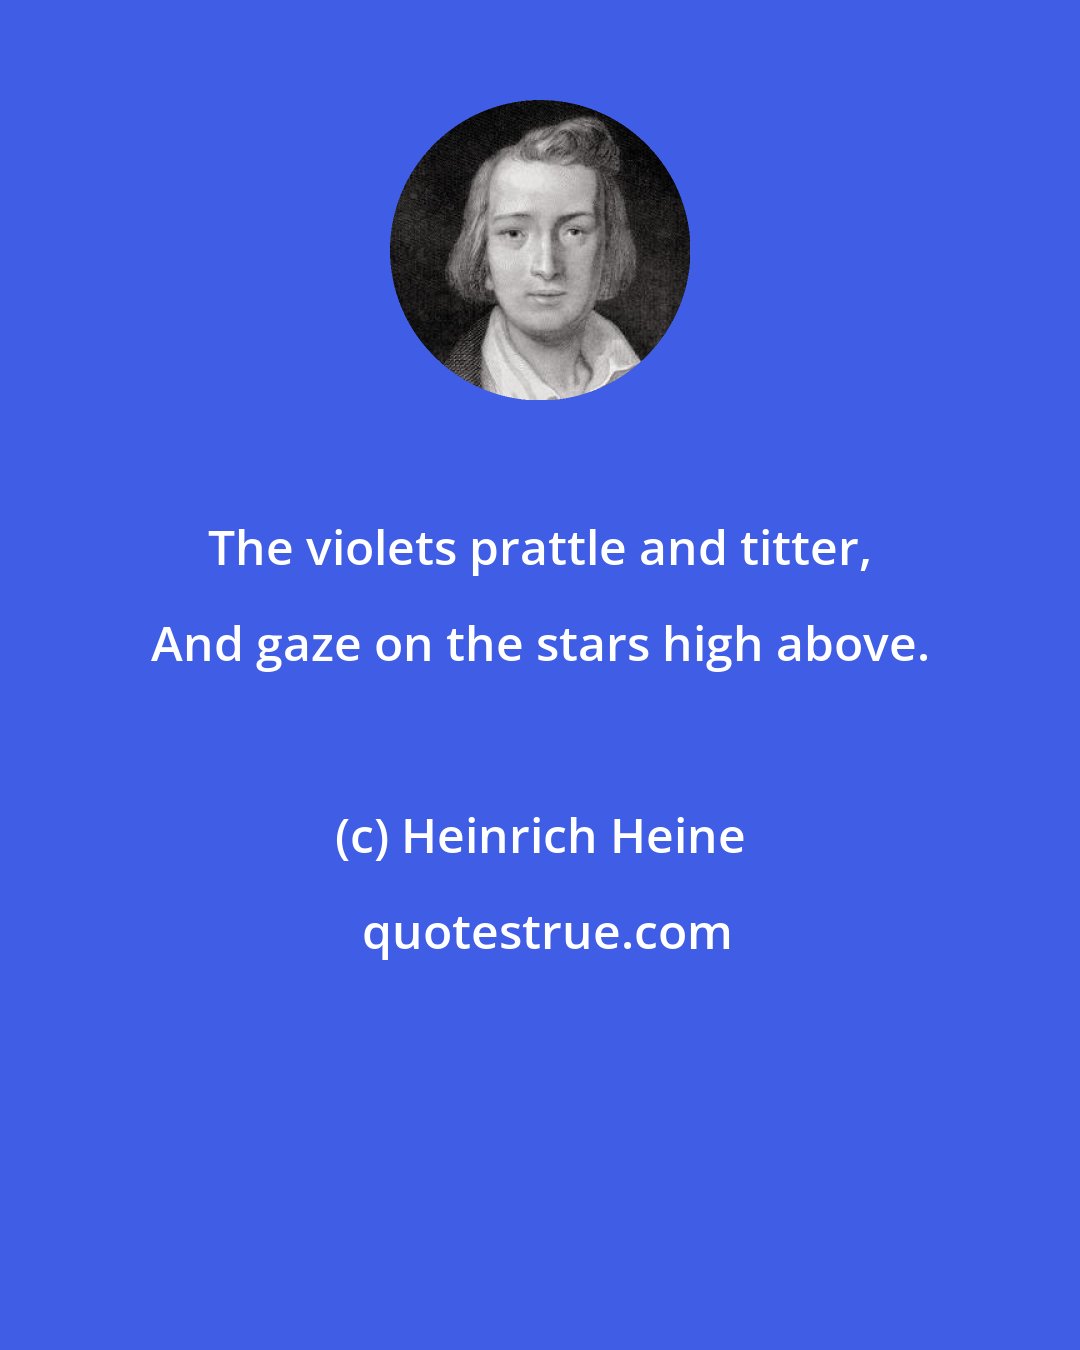 Heinrich Heine: The violets prattle and titter, And gaze on the stars high above.